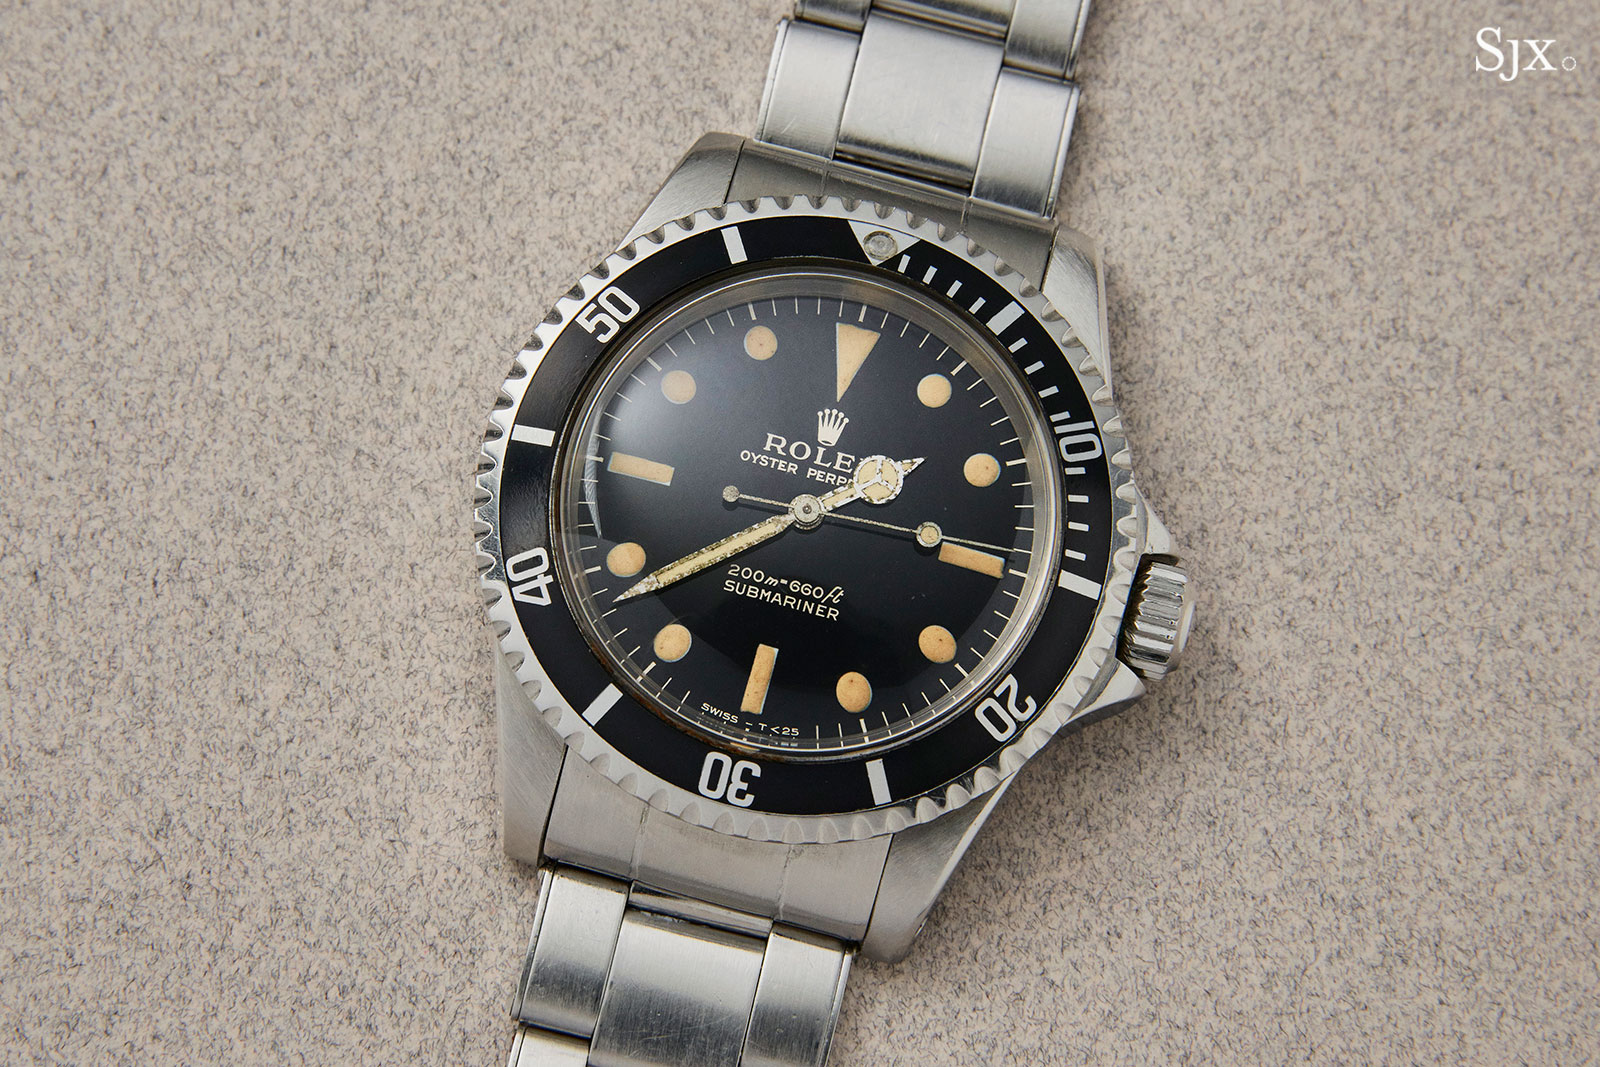 Rolex Submariner 5513 glossy dial 2